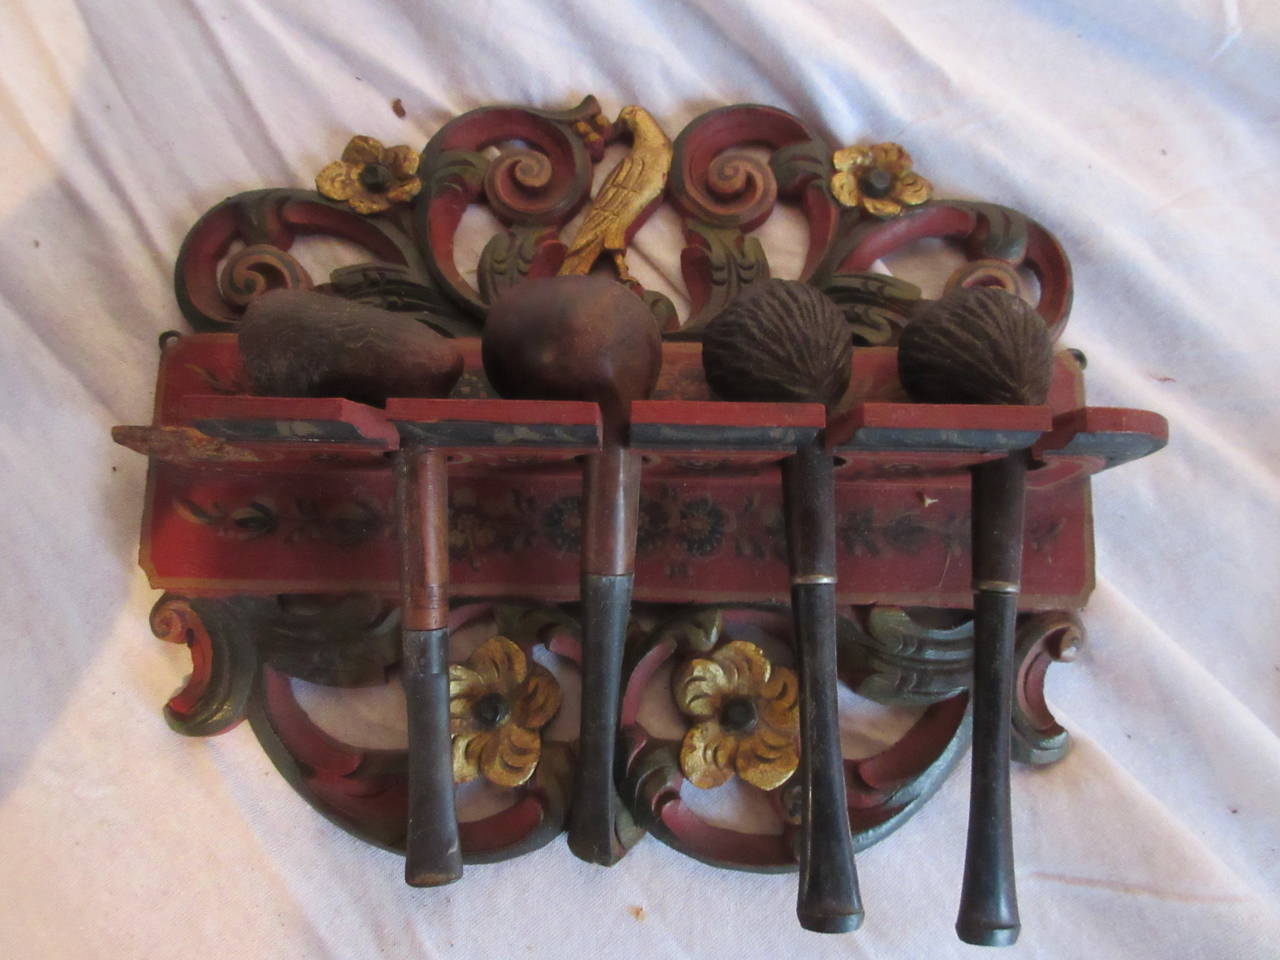 In our collection Tabacology:

Charming antique pipe rack painted in Hindeloopen(see below) attributed to Arend Roosje (1869-1914).
This pipe rack could hold four pipes; the pipes in the rack, three of which are old ( Bruyere) Briar pipes come